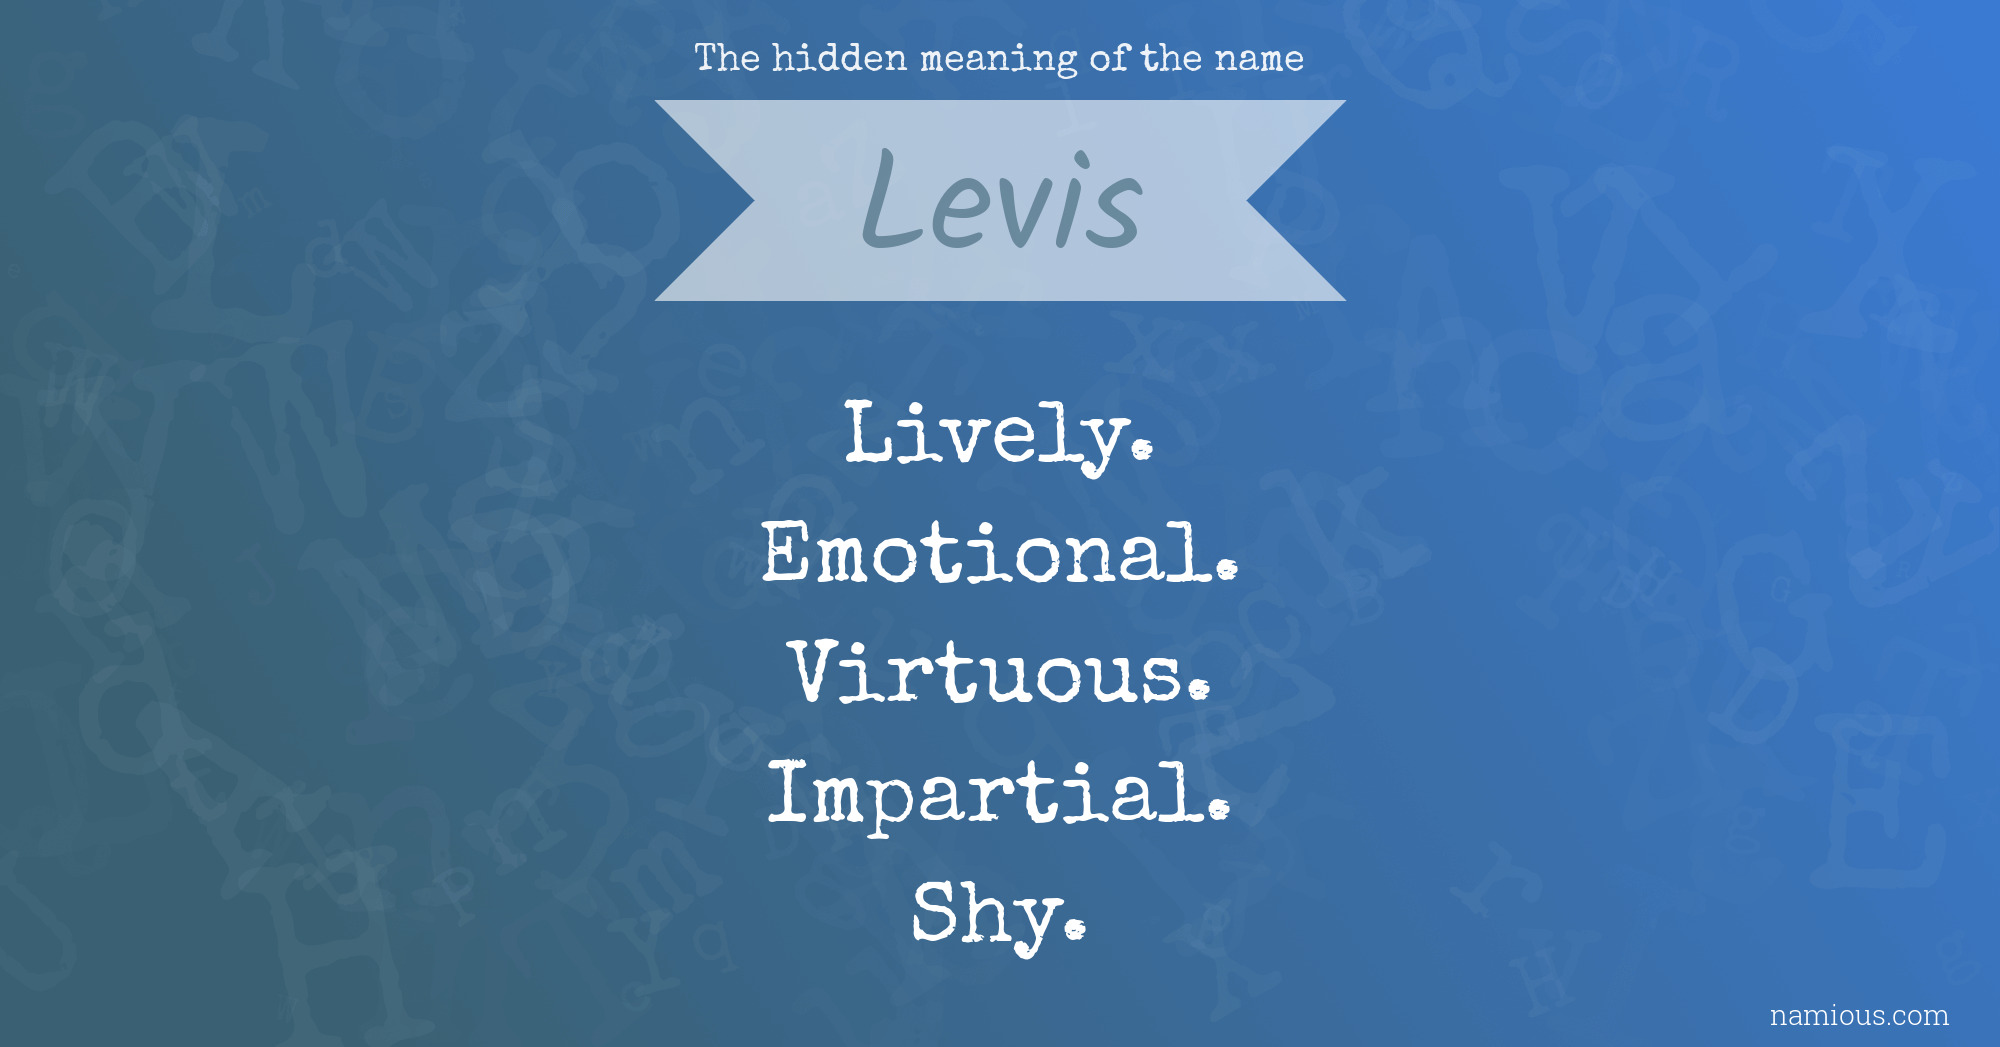 The hidden meaning of the name Levis | Namious